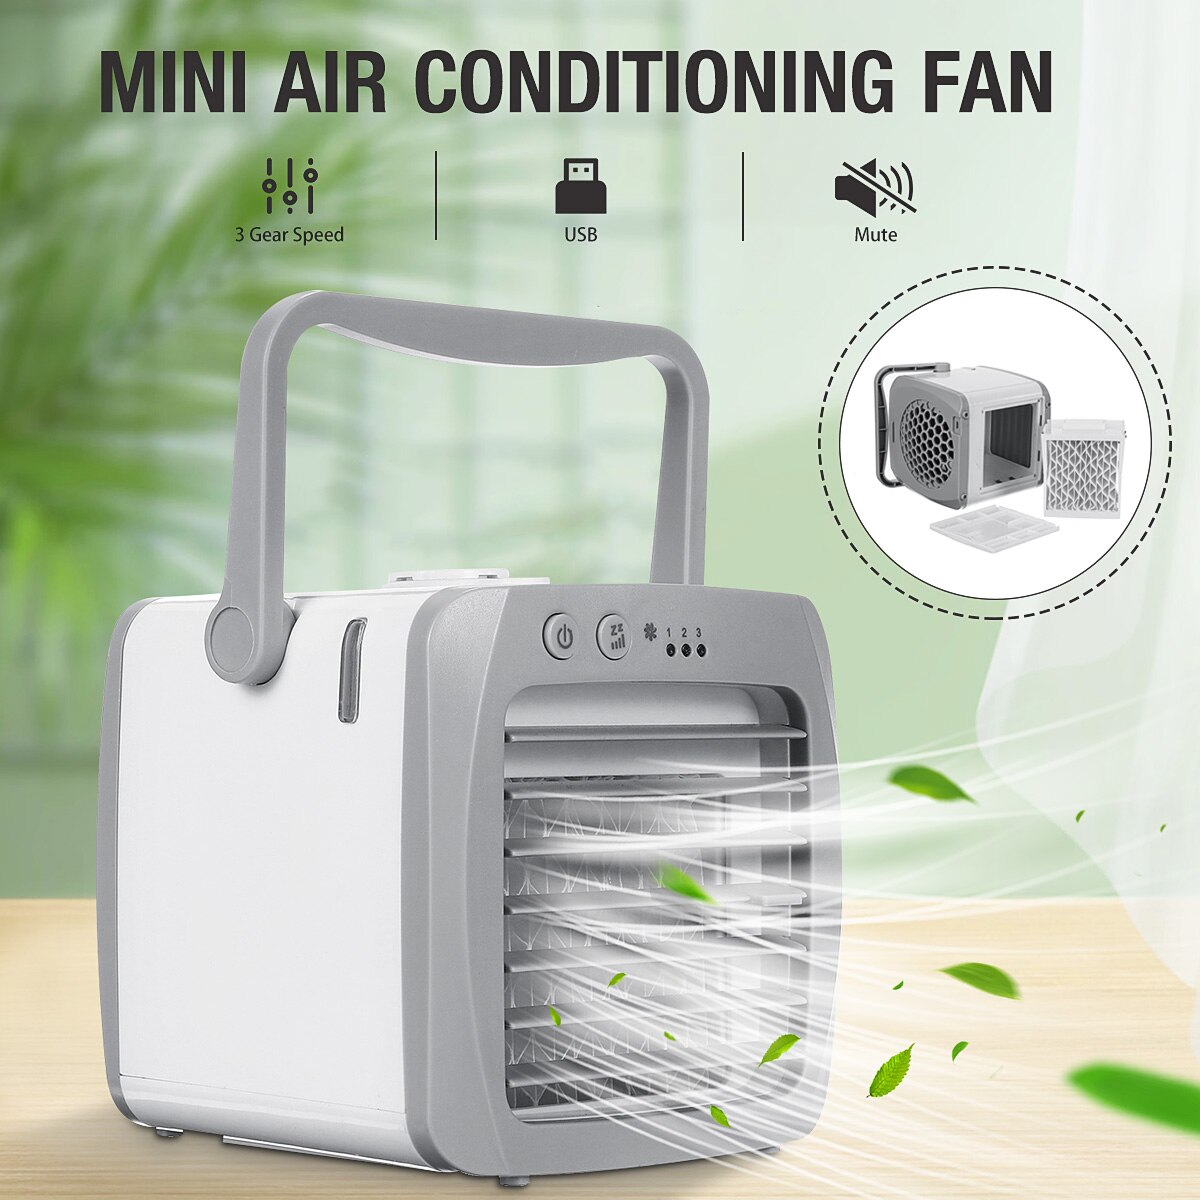 Mini Portable Air Conditioner 3Speed Air Conditioning Humidifier Purifier USB Desktop Air Cooler Fan Cooling Fan For Home Office